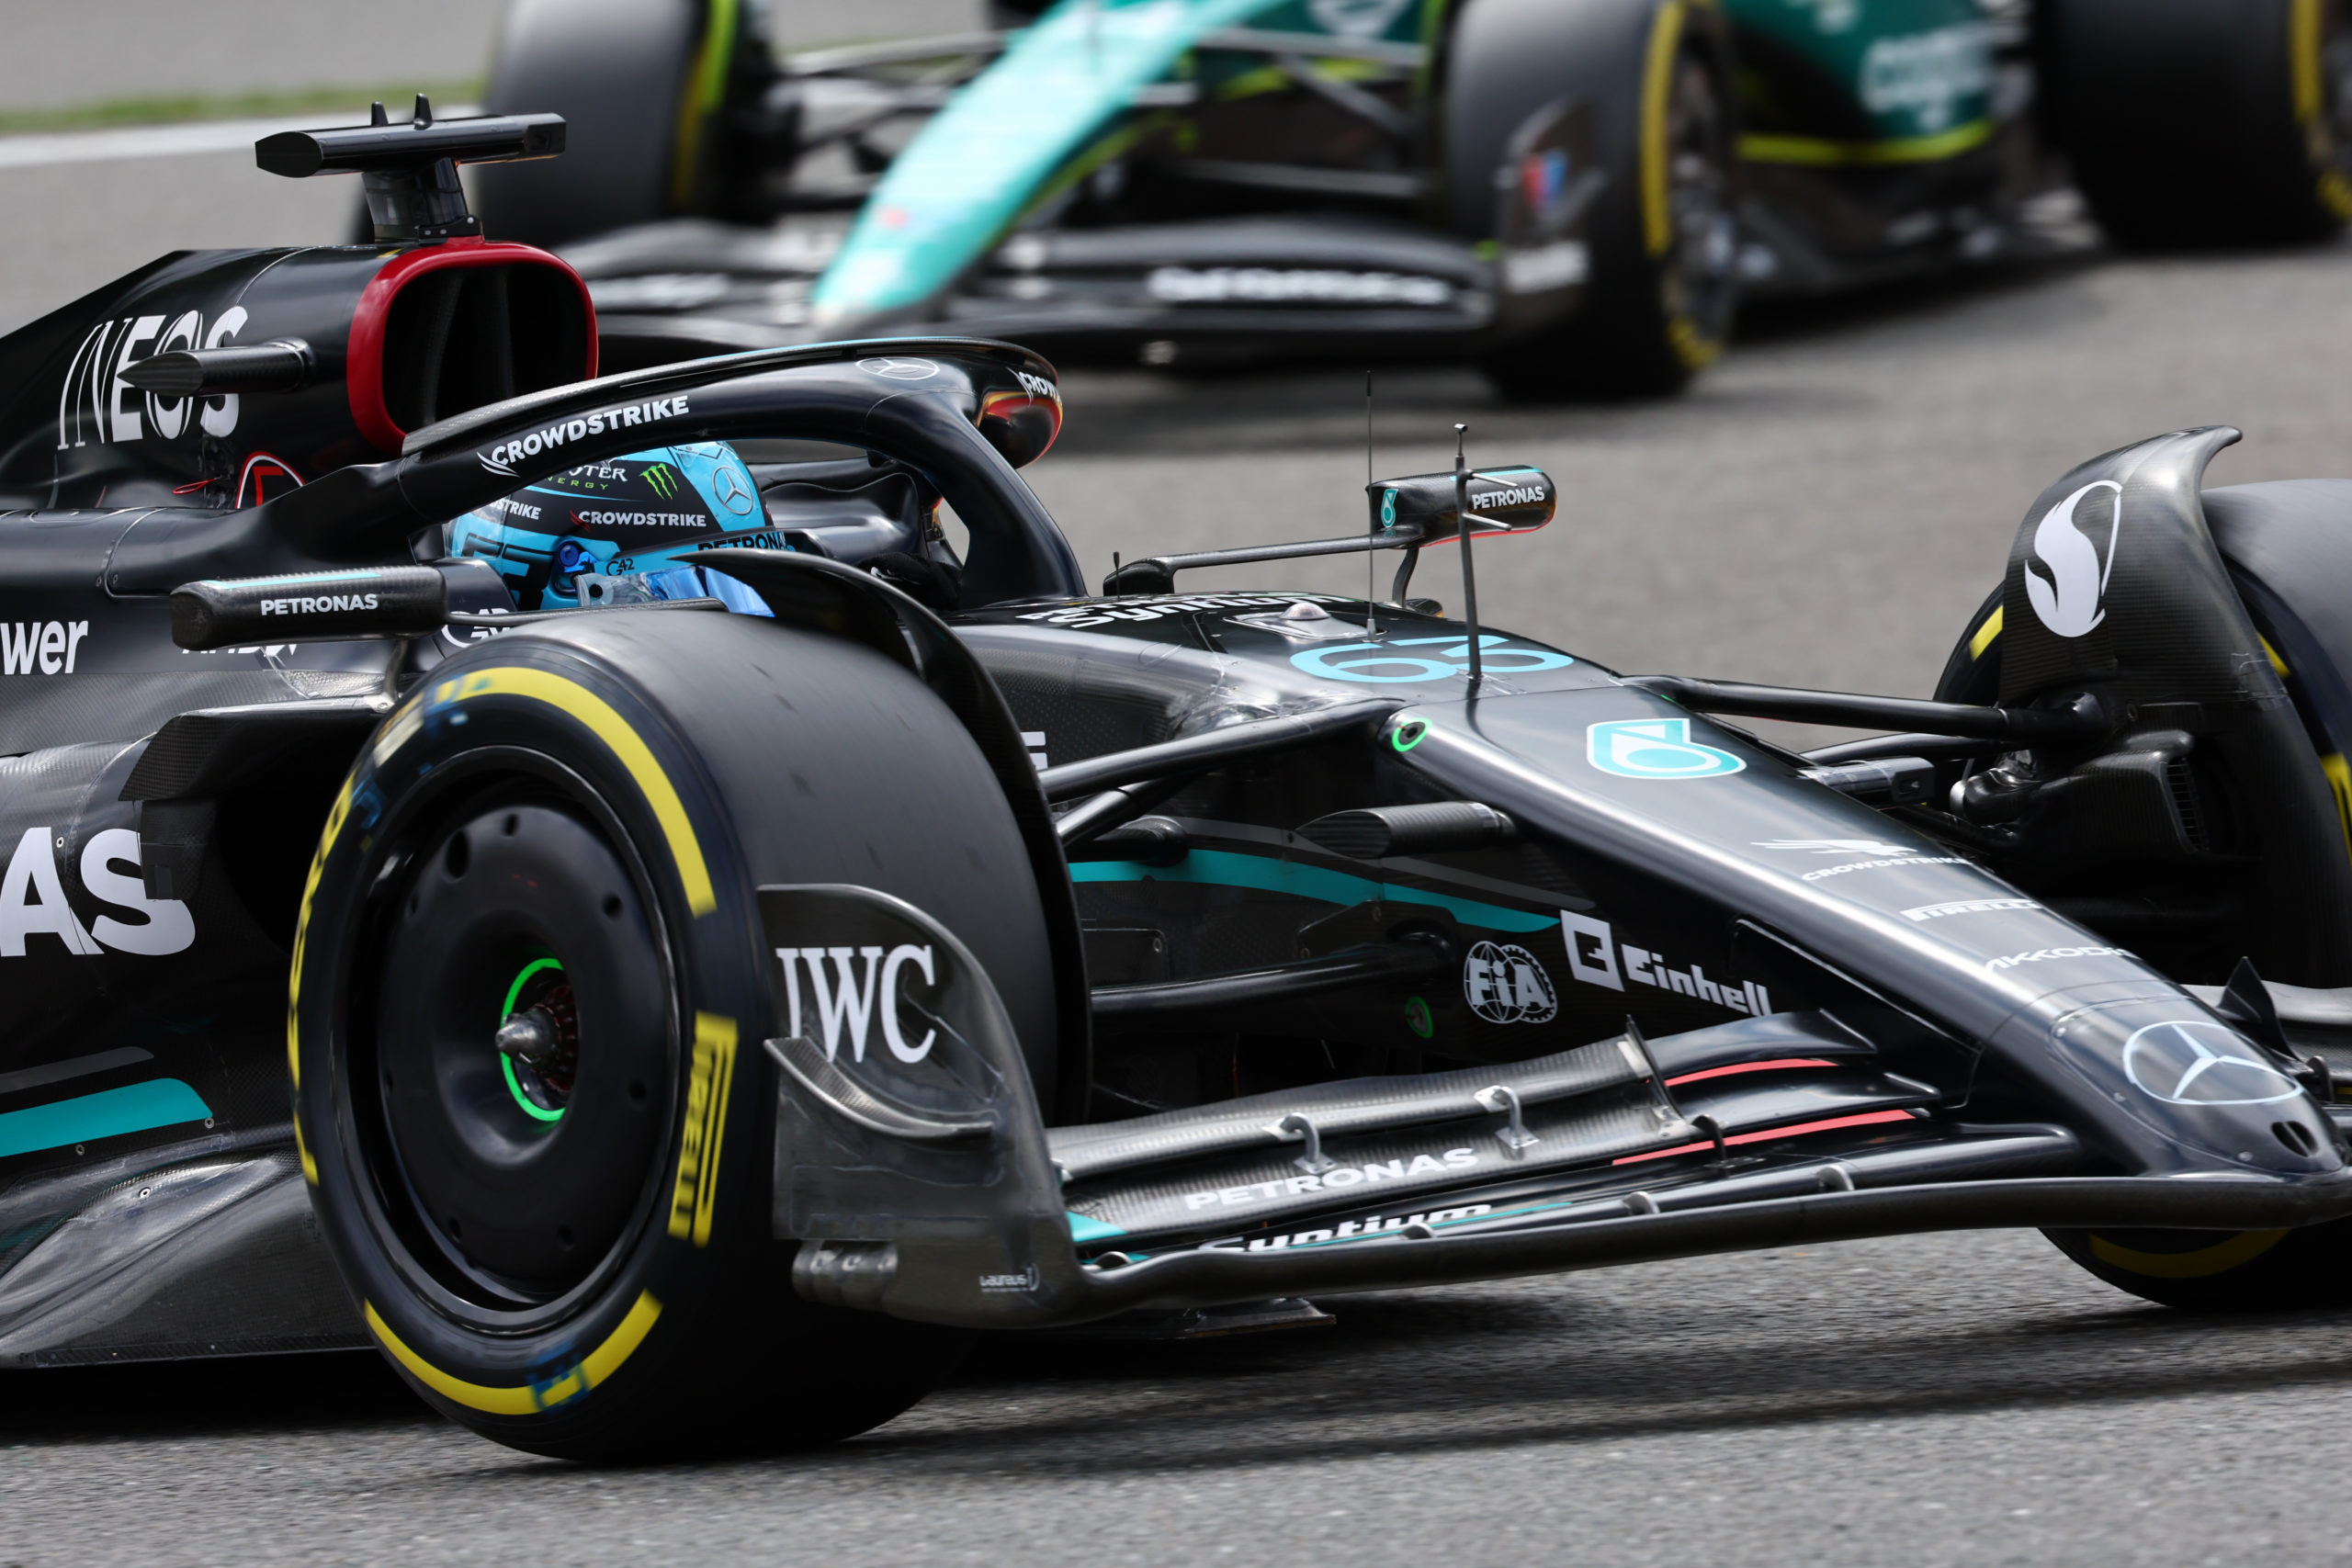 mercedes ‘caution’ shows how badly f1’s new era has spooked it